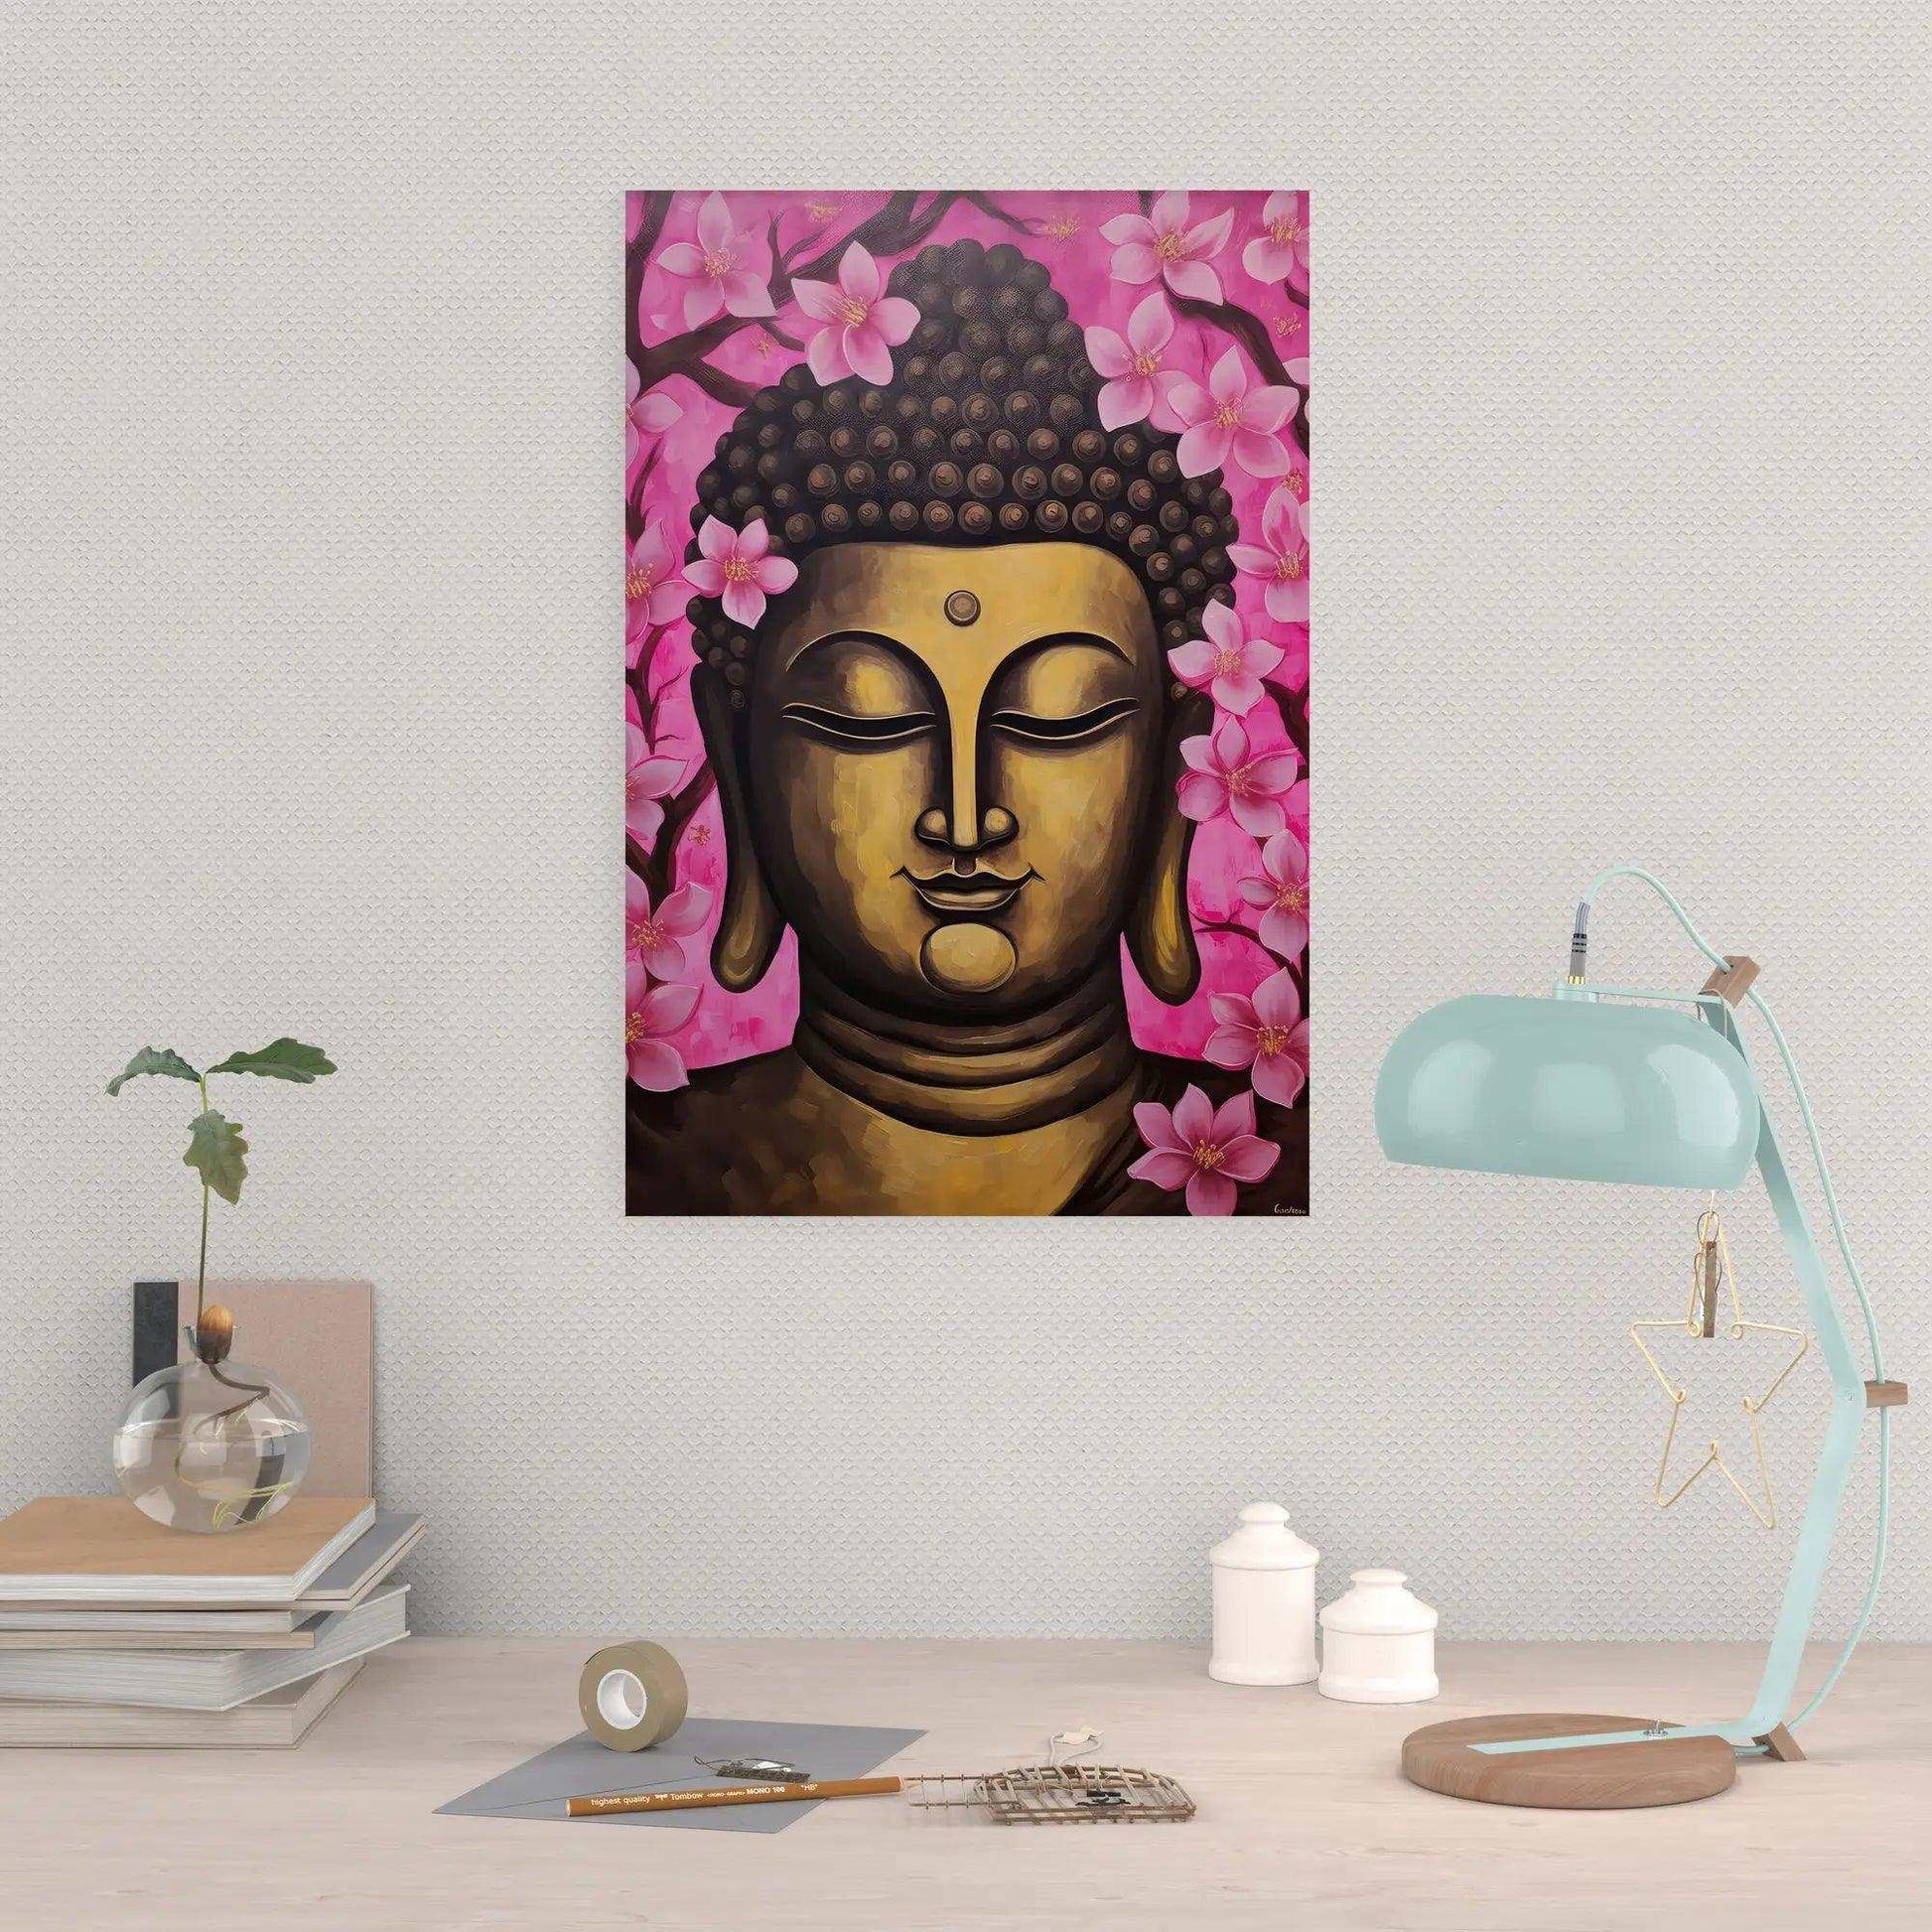 A serene portrait of Buddha surrounded by pink cherry blossoms, centered on a white textured wall above a modern workspace with a glass vase, stacked books, and a mint green desk lamp.